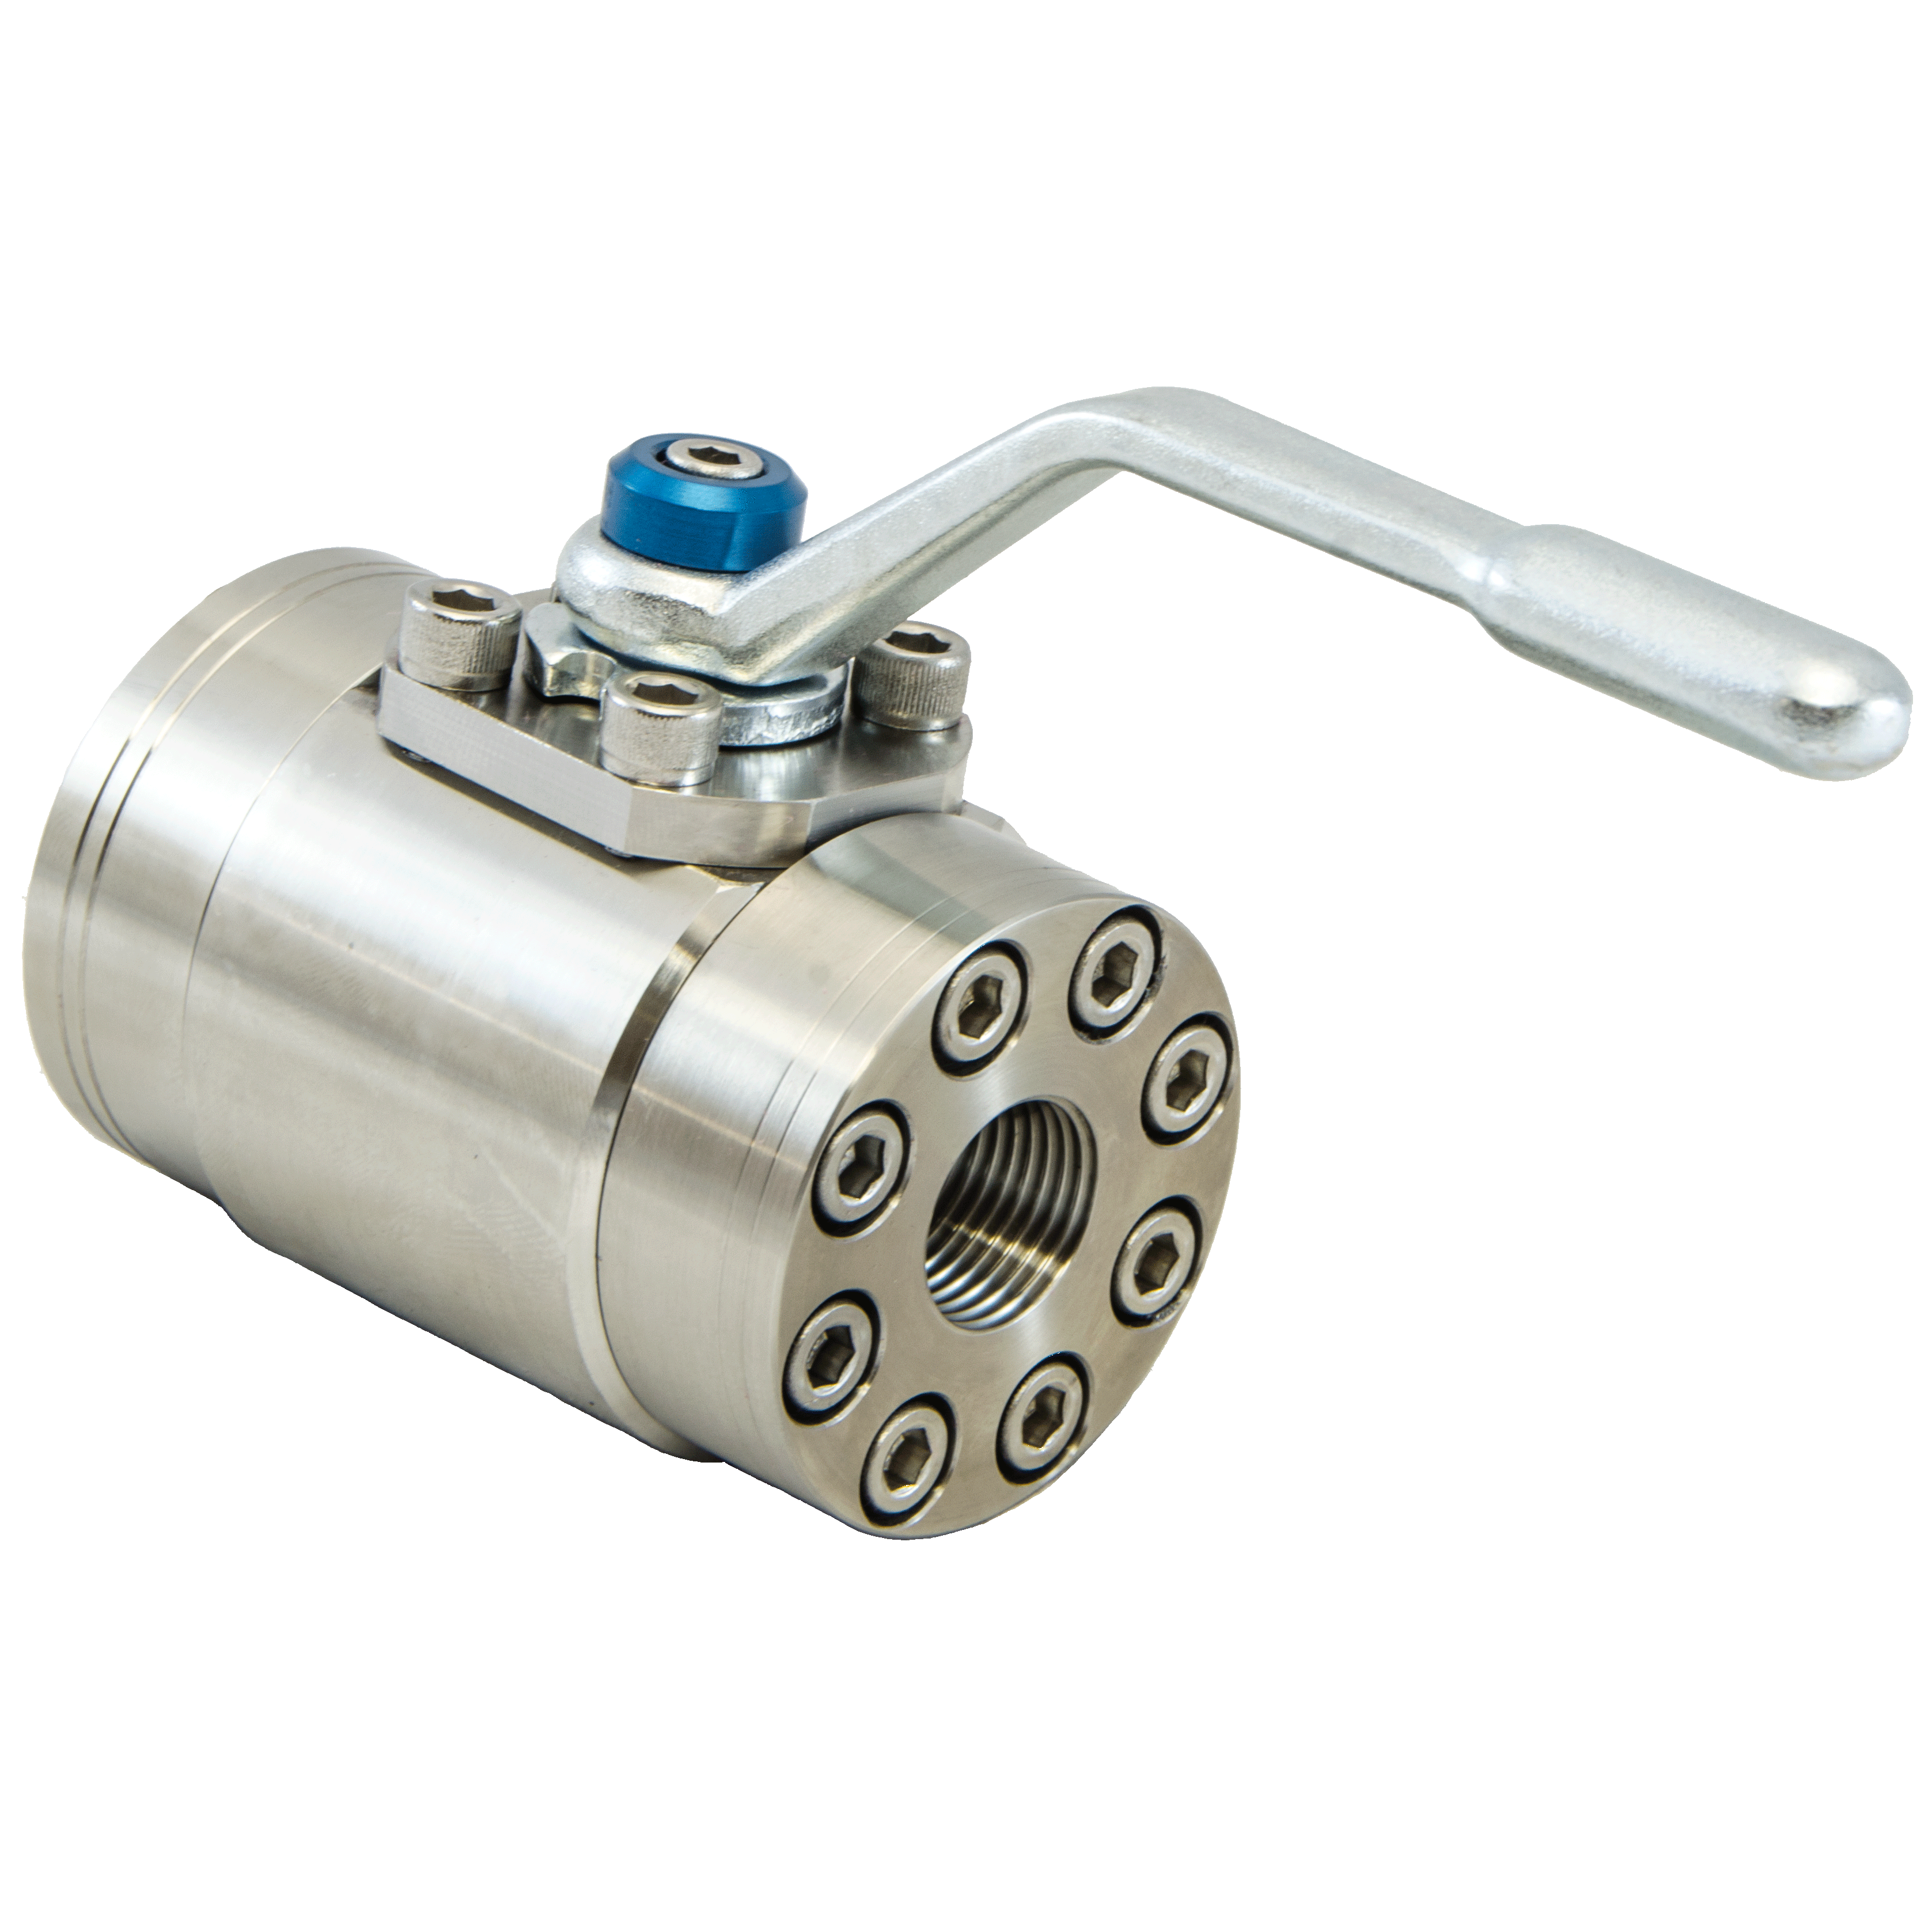 BVQG-0750N-2211 : DMIC Stainless Gas Ball Valve, 3/4 NPT, 316 Stainless Steel, 6000psi, Two-Way